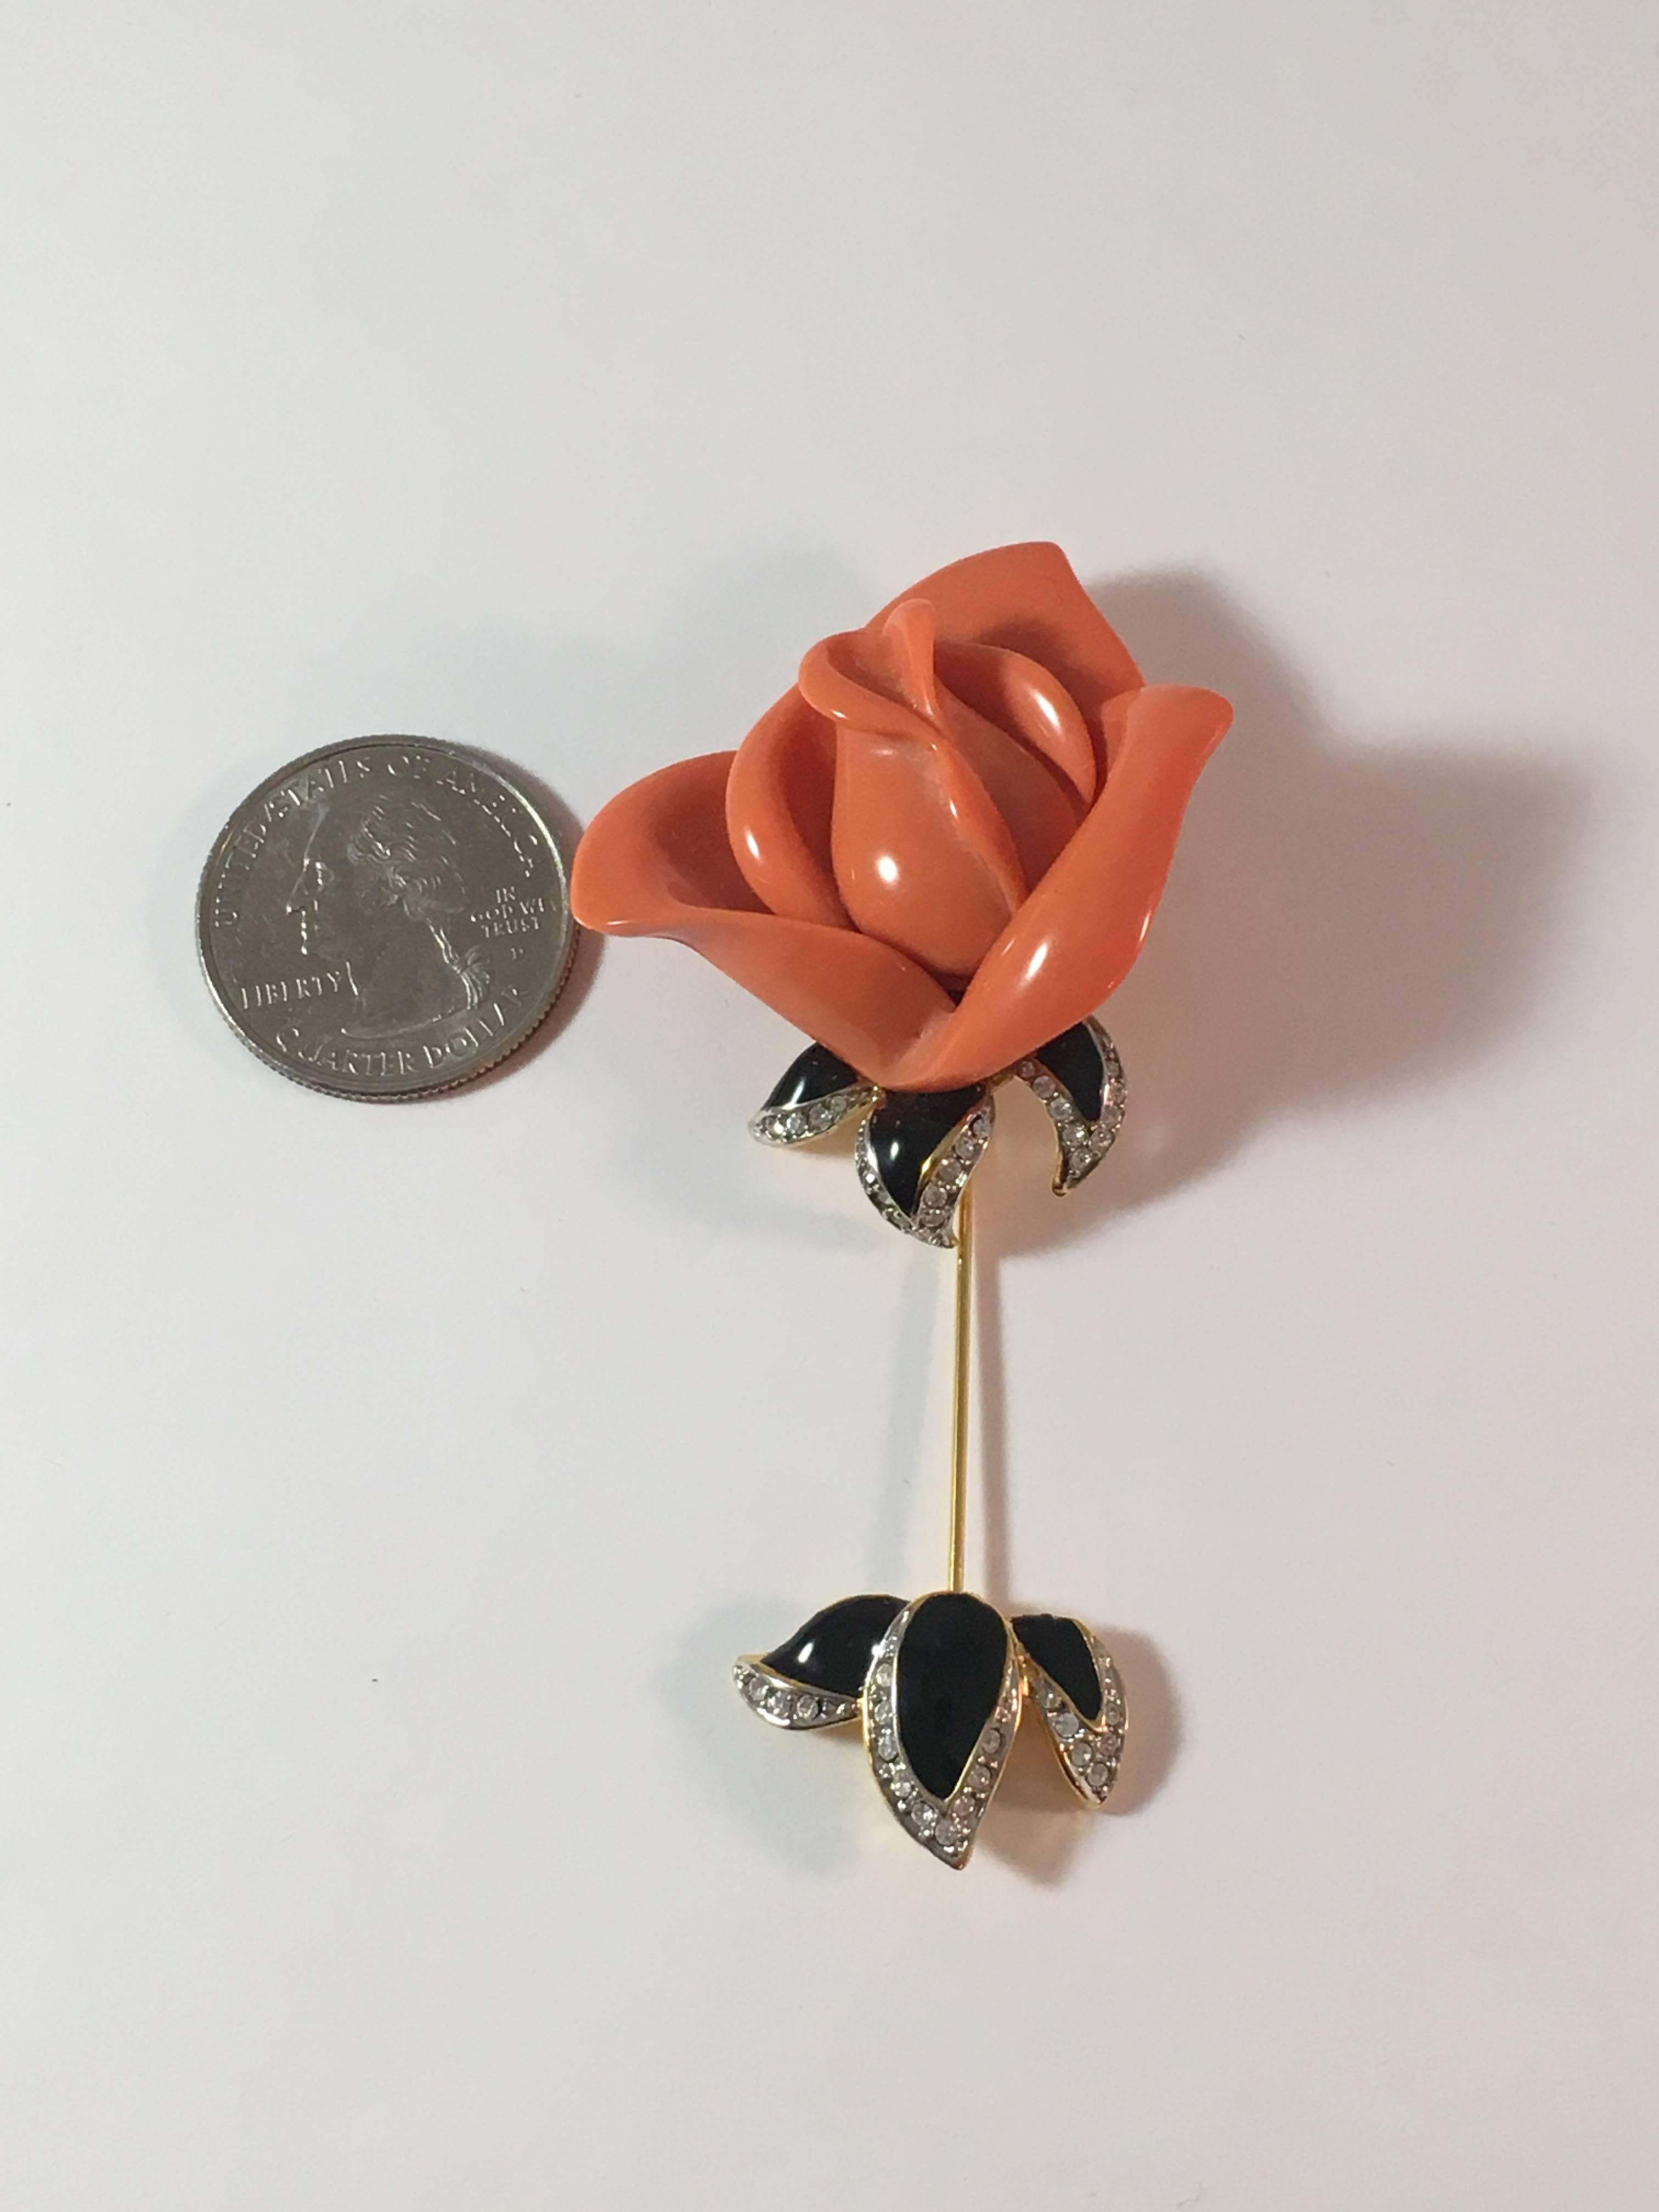 Kenneth Jay Lane Coral Colored Rose Stick Pin In Excellent Condition For Sale In Chicago, IL